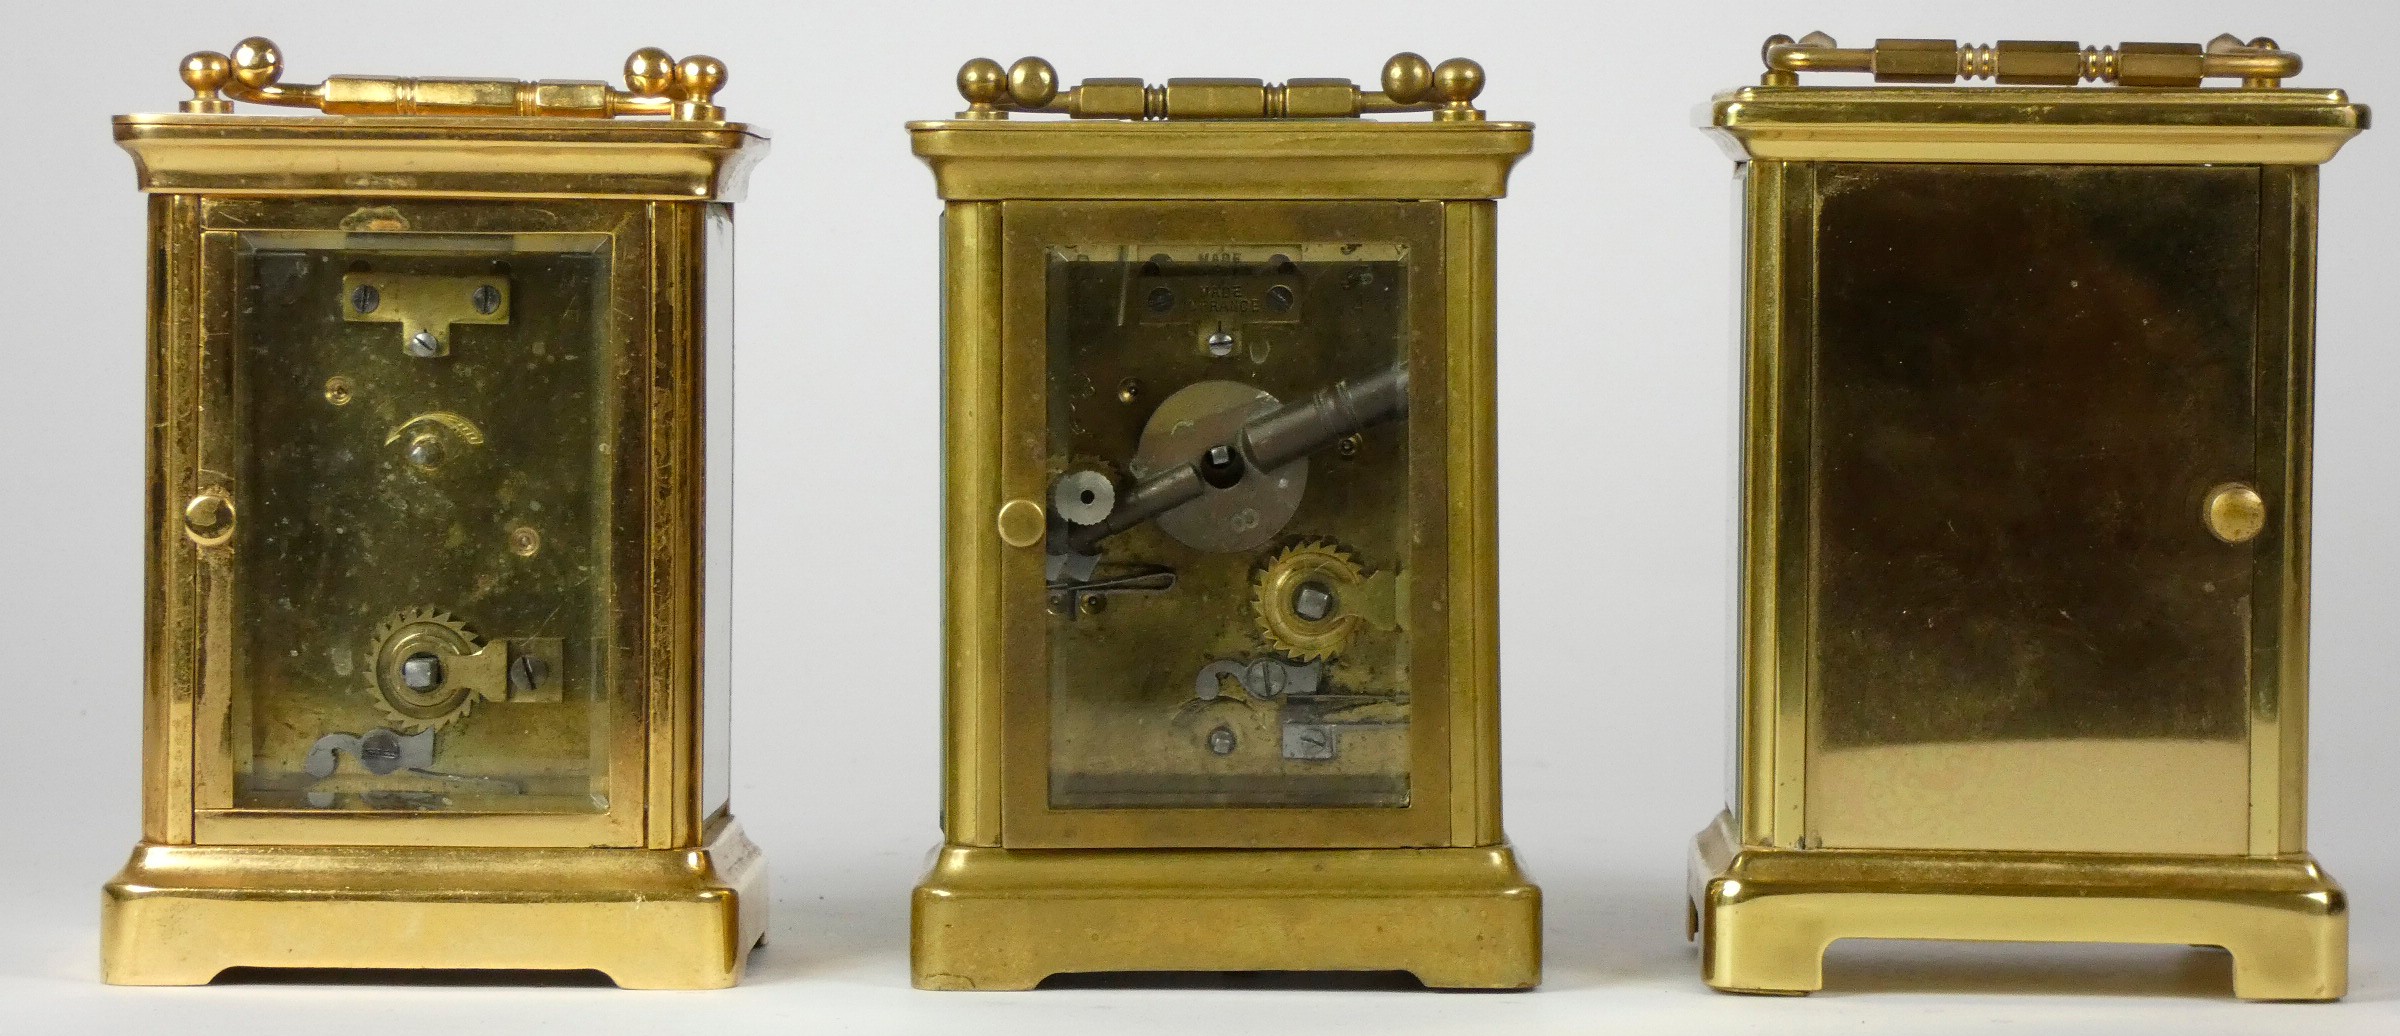 Three early 20th Century brass carriage clocks, white enameled dials with Roman numerals, 8 day - Image 3 of 3